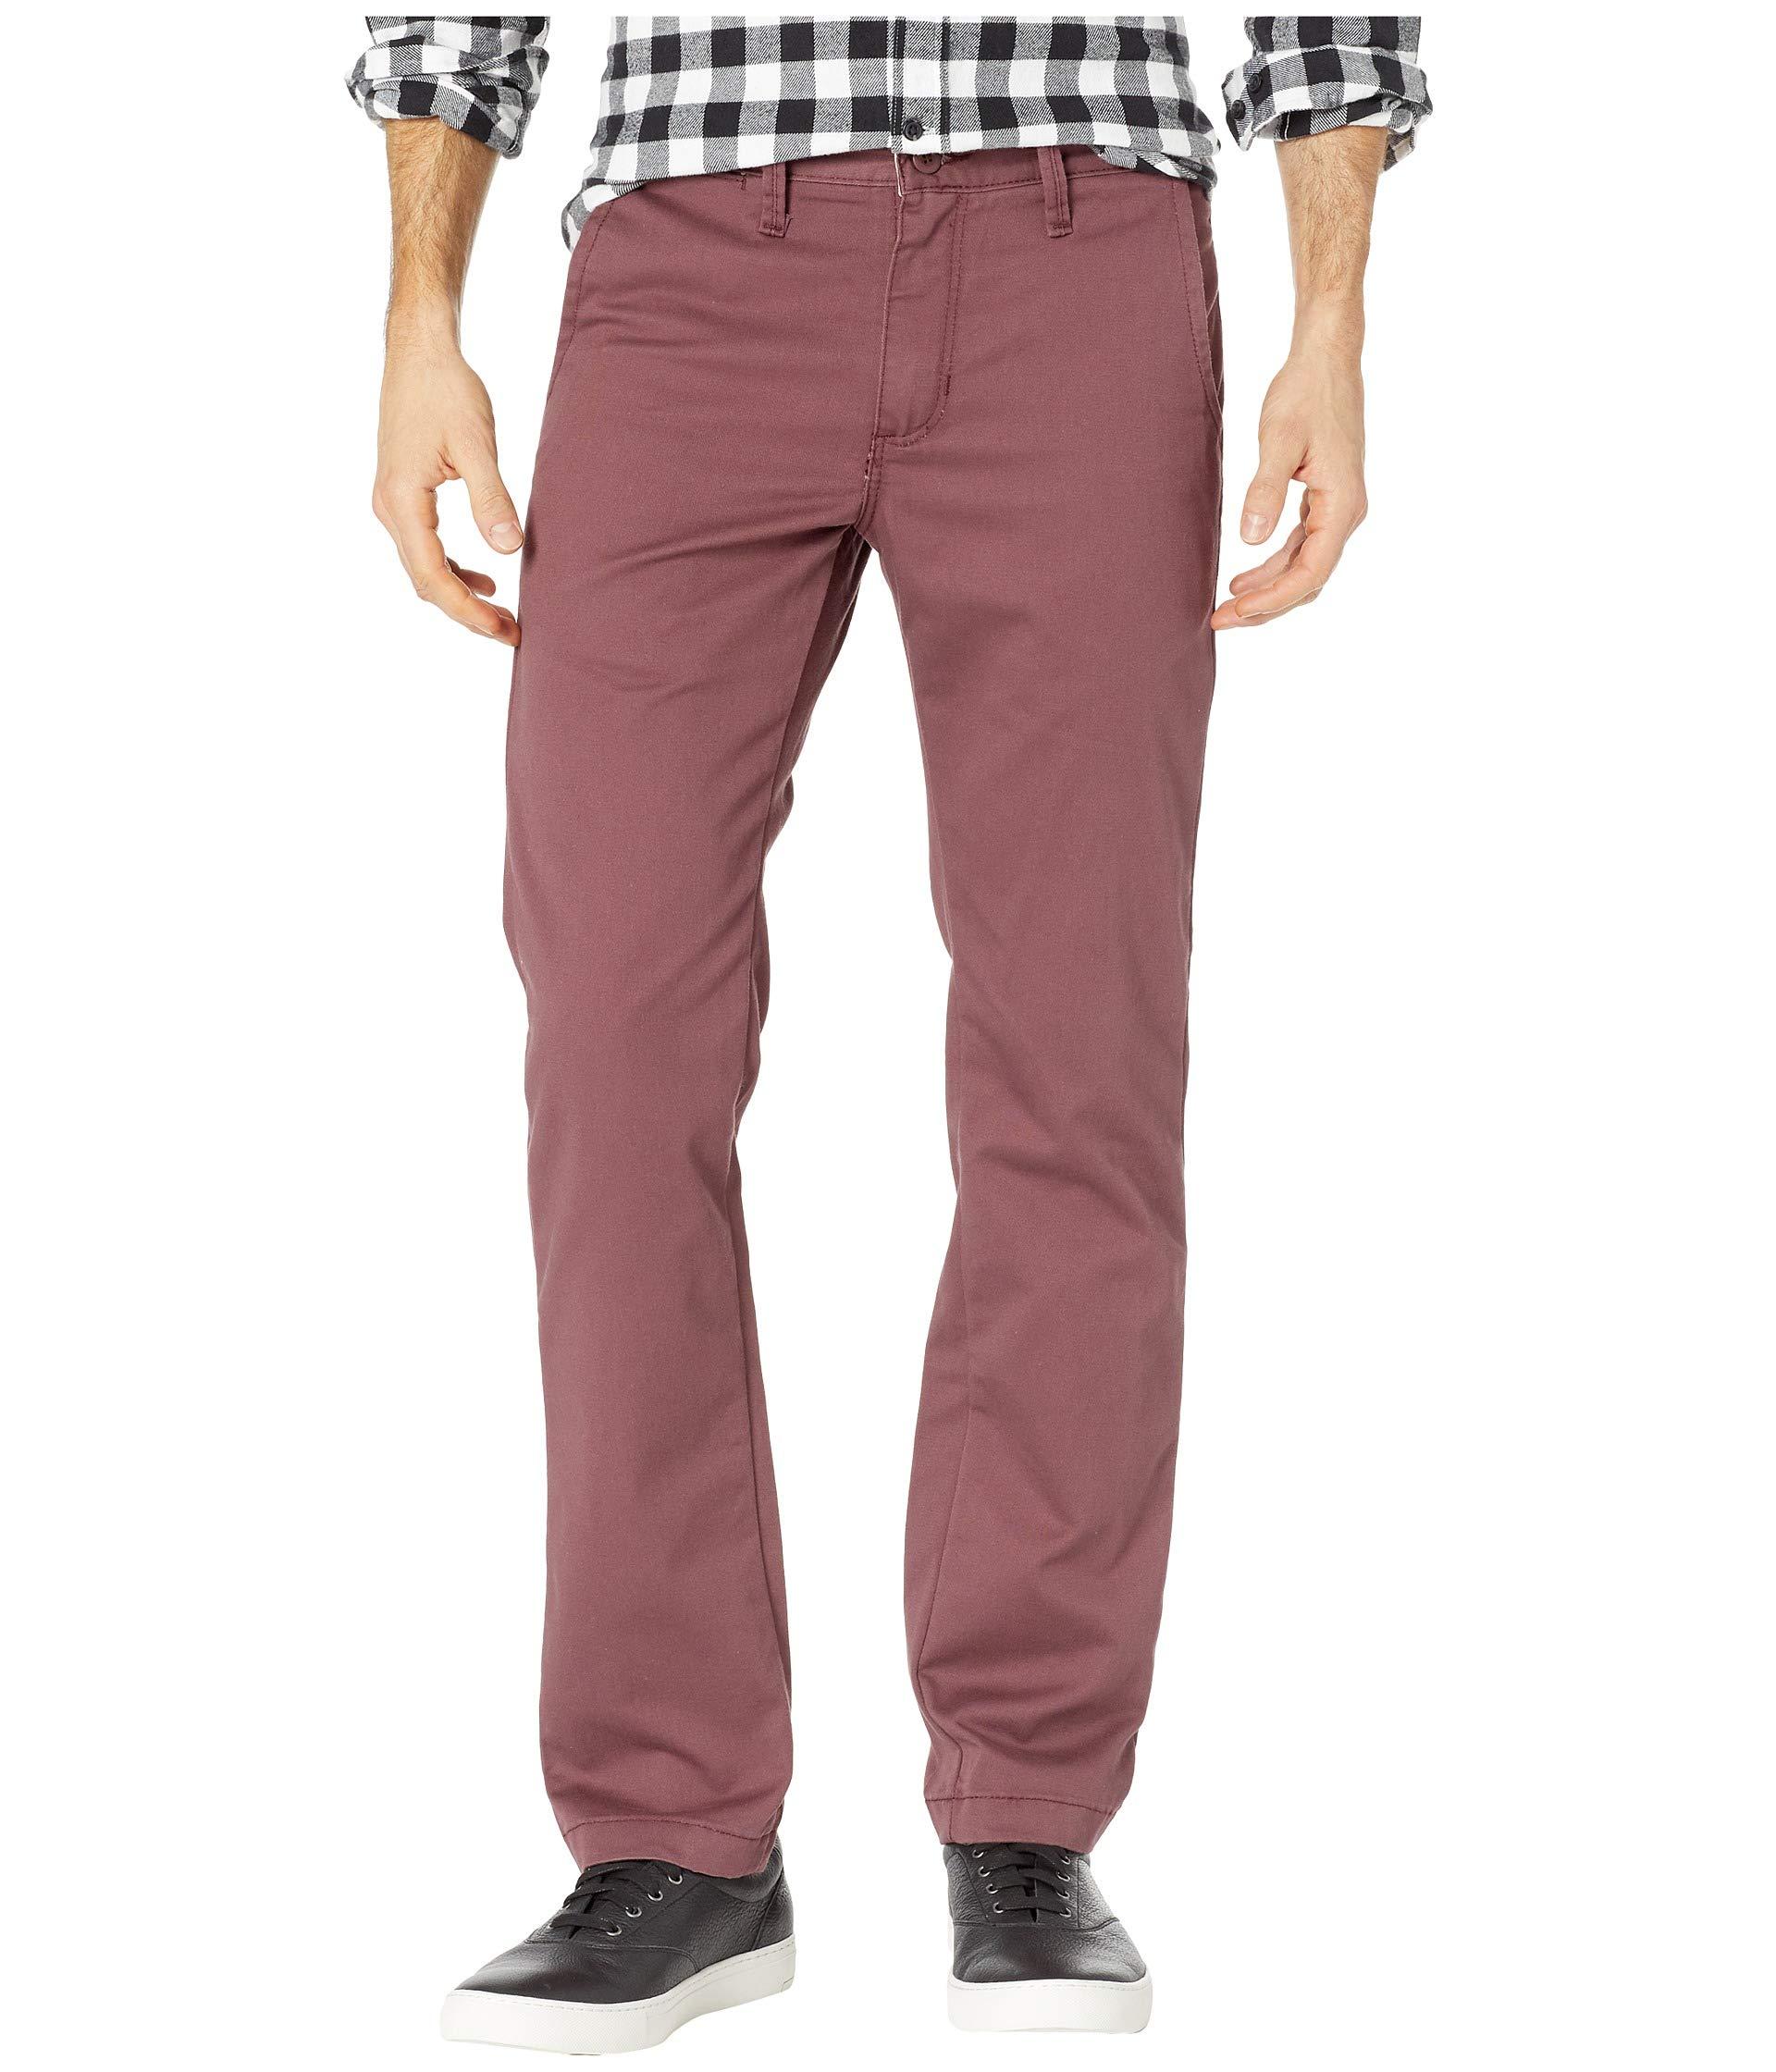 Vans Cotton Authentic Stretch Chino Pants in Burgundy (Red) for Men - Lyst